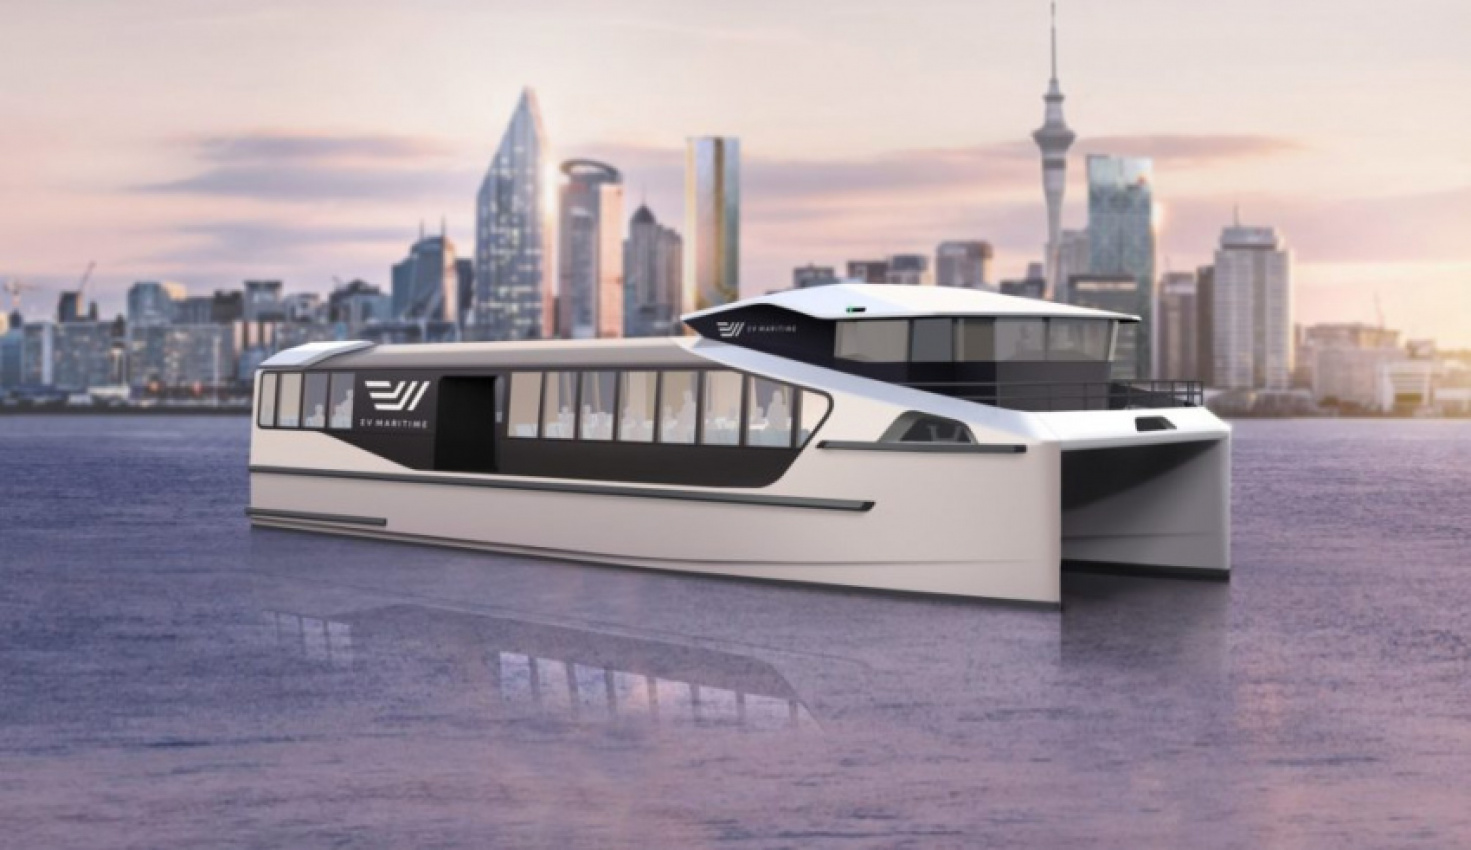 autos, cars, electric vehicle, water, auckland, danfoss editron, electric ferries, ev maritime, new zealand, nz: auckland to launch first electric ferries in 2024